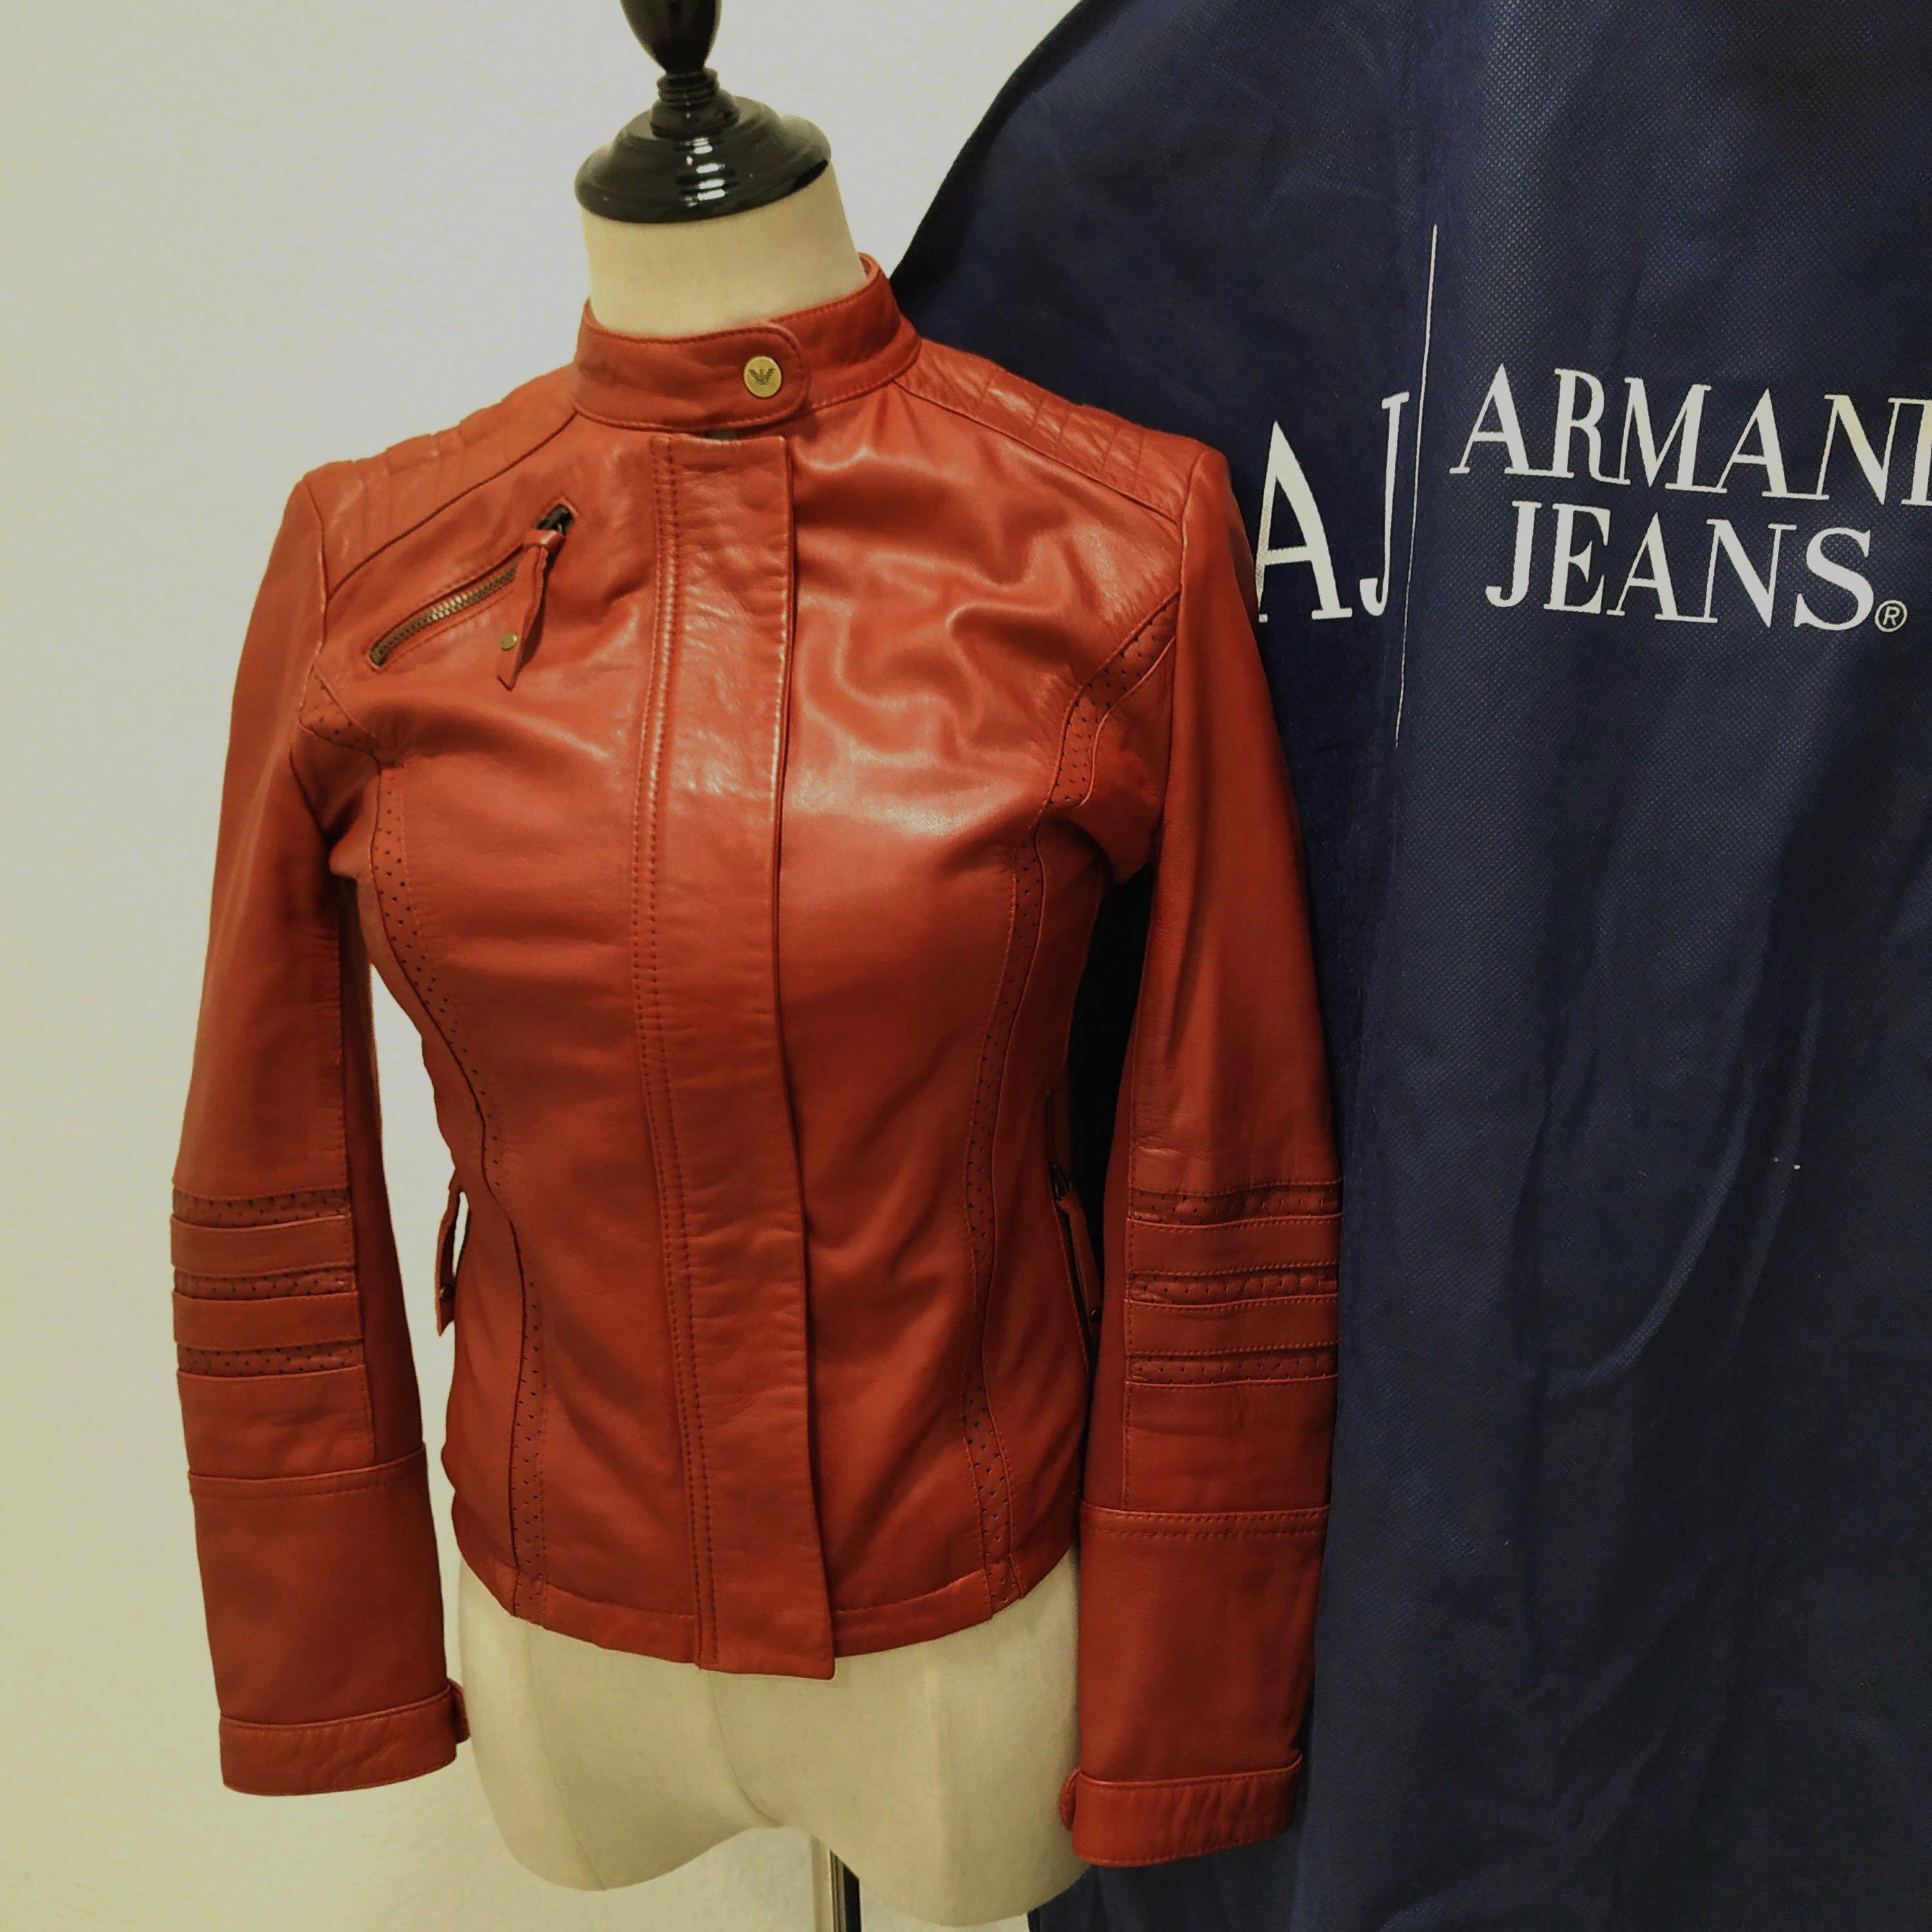 Armani Jeans 30th Anniversary Leather Jacket 207001167, Women's Fashion,  Coats, Jackets and Outerwear on Carousell